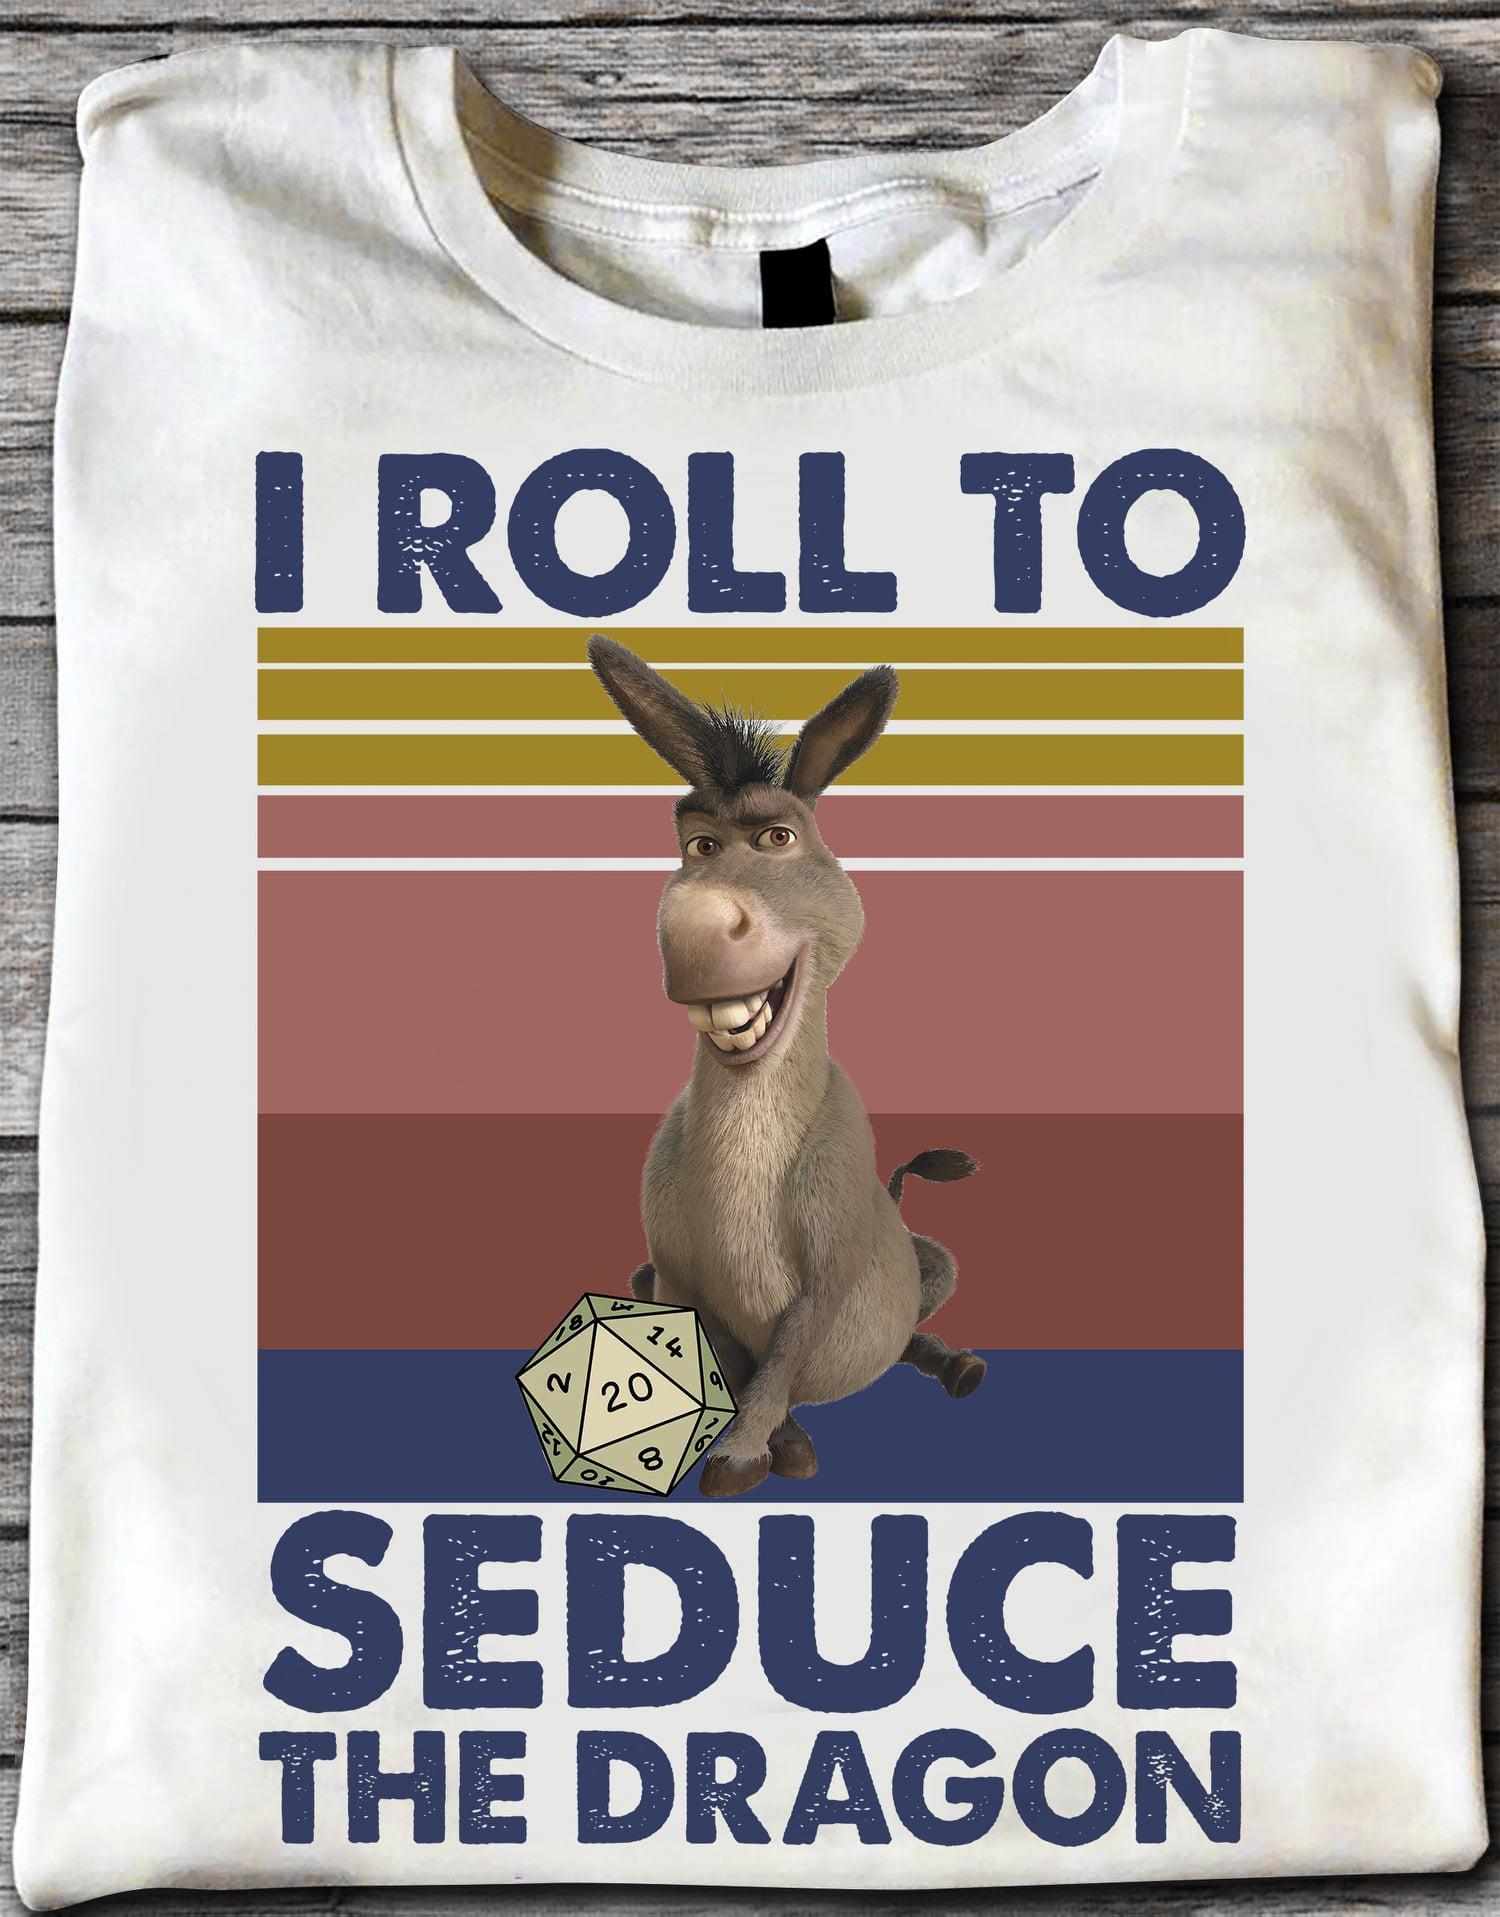 I roll to seduce the dragon - Donkey and Dice, Dungeons and Dragons